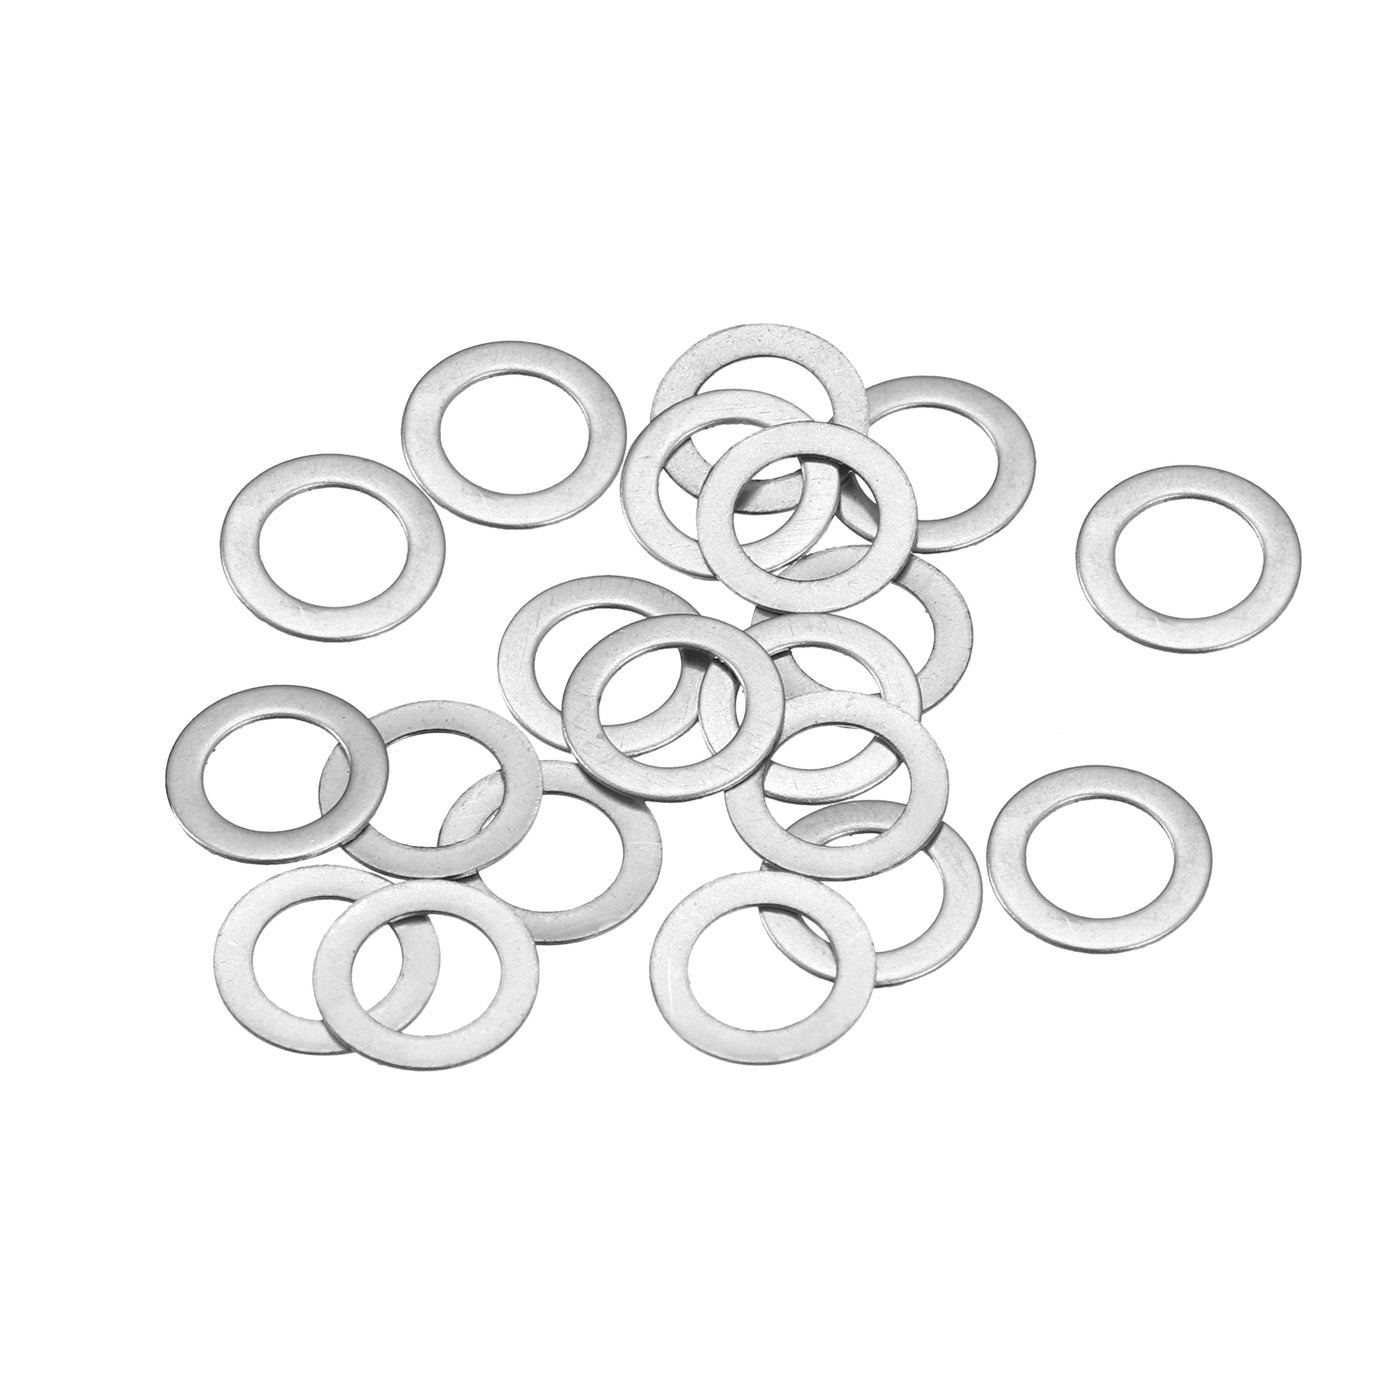 uxcell Uxcell M5 304 Stainless Steel Flat Washers, 20pcs 5x8x0.2mm Ultra Thin Flat Spacers